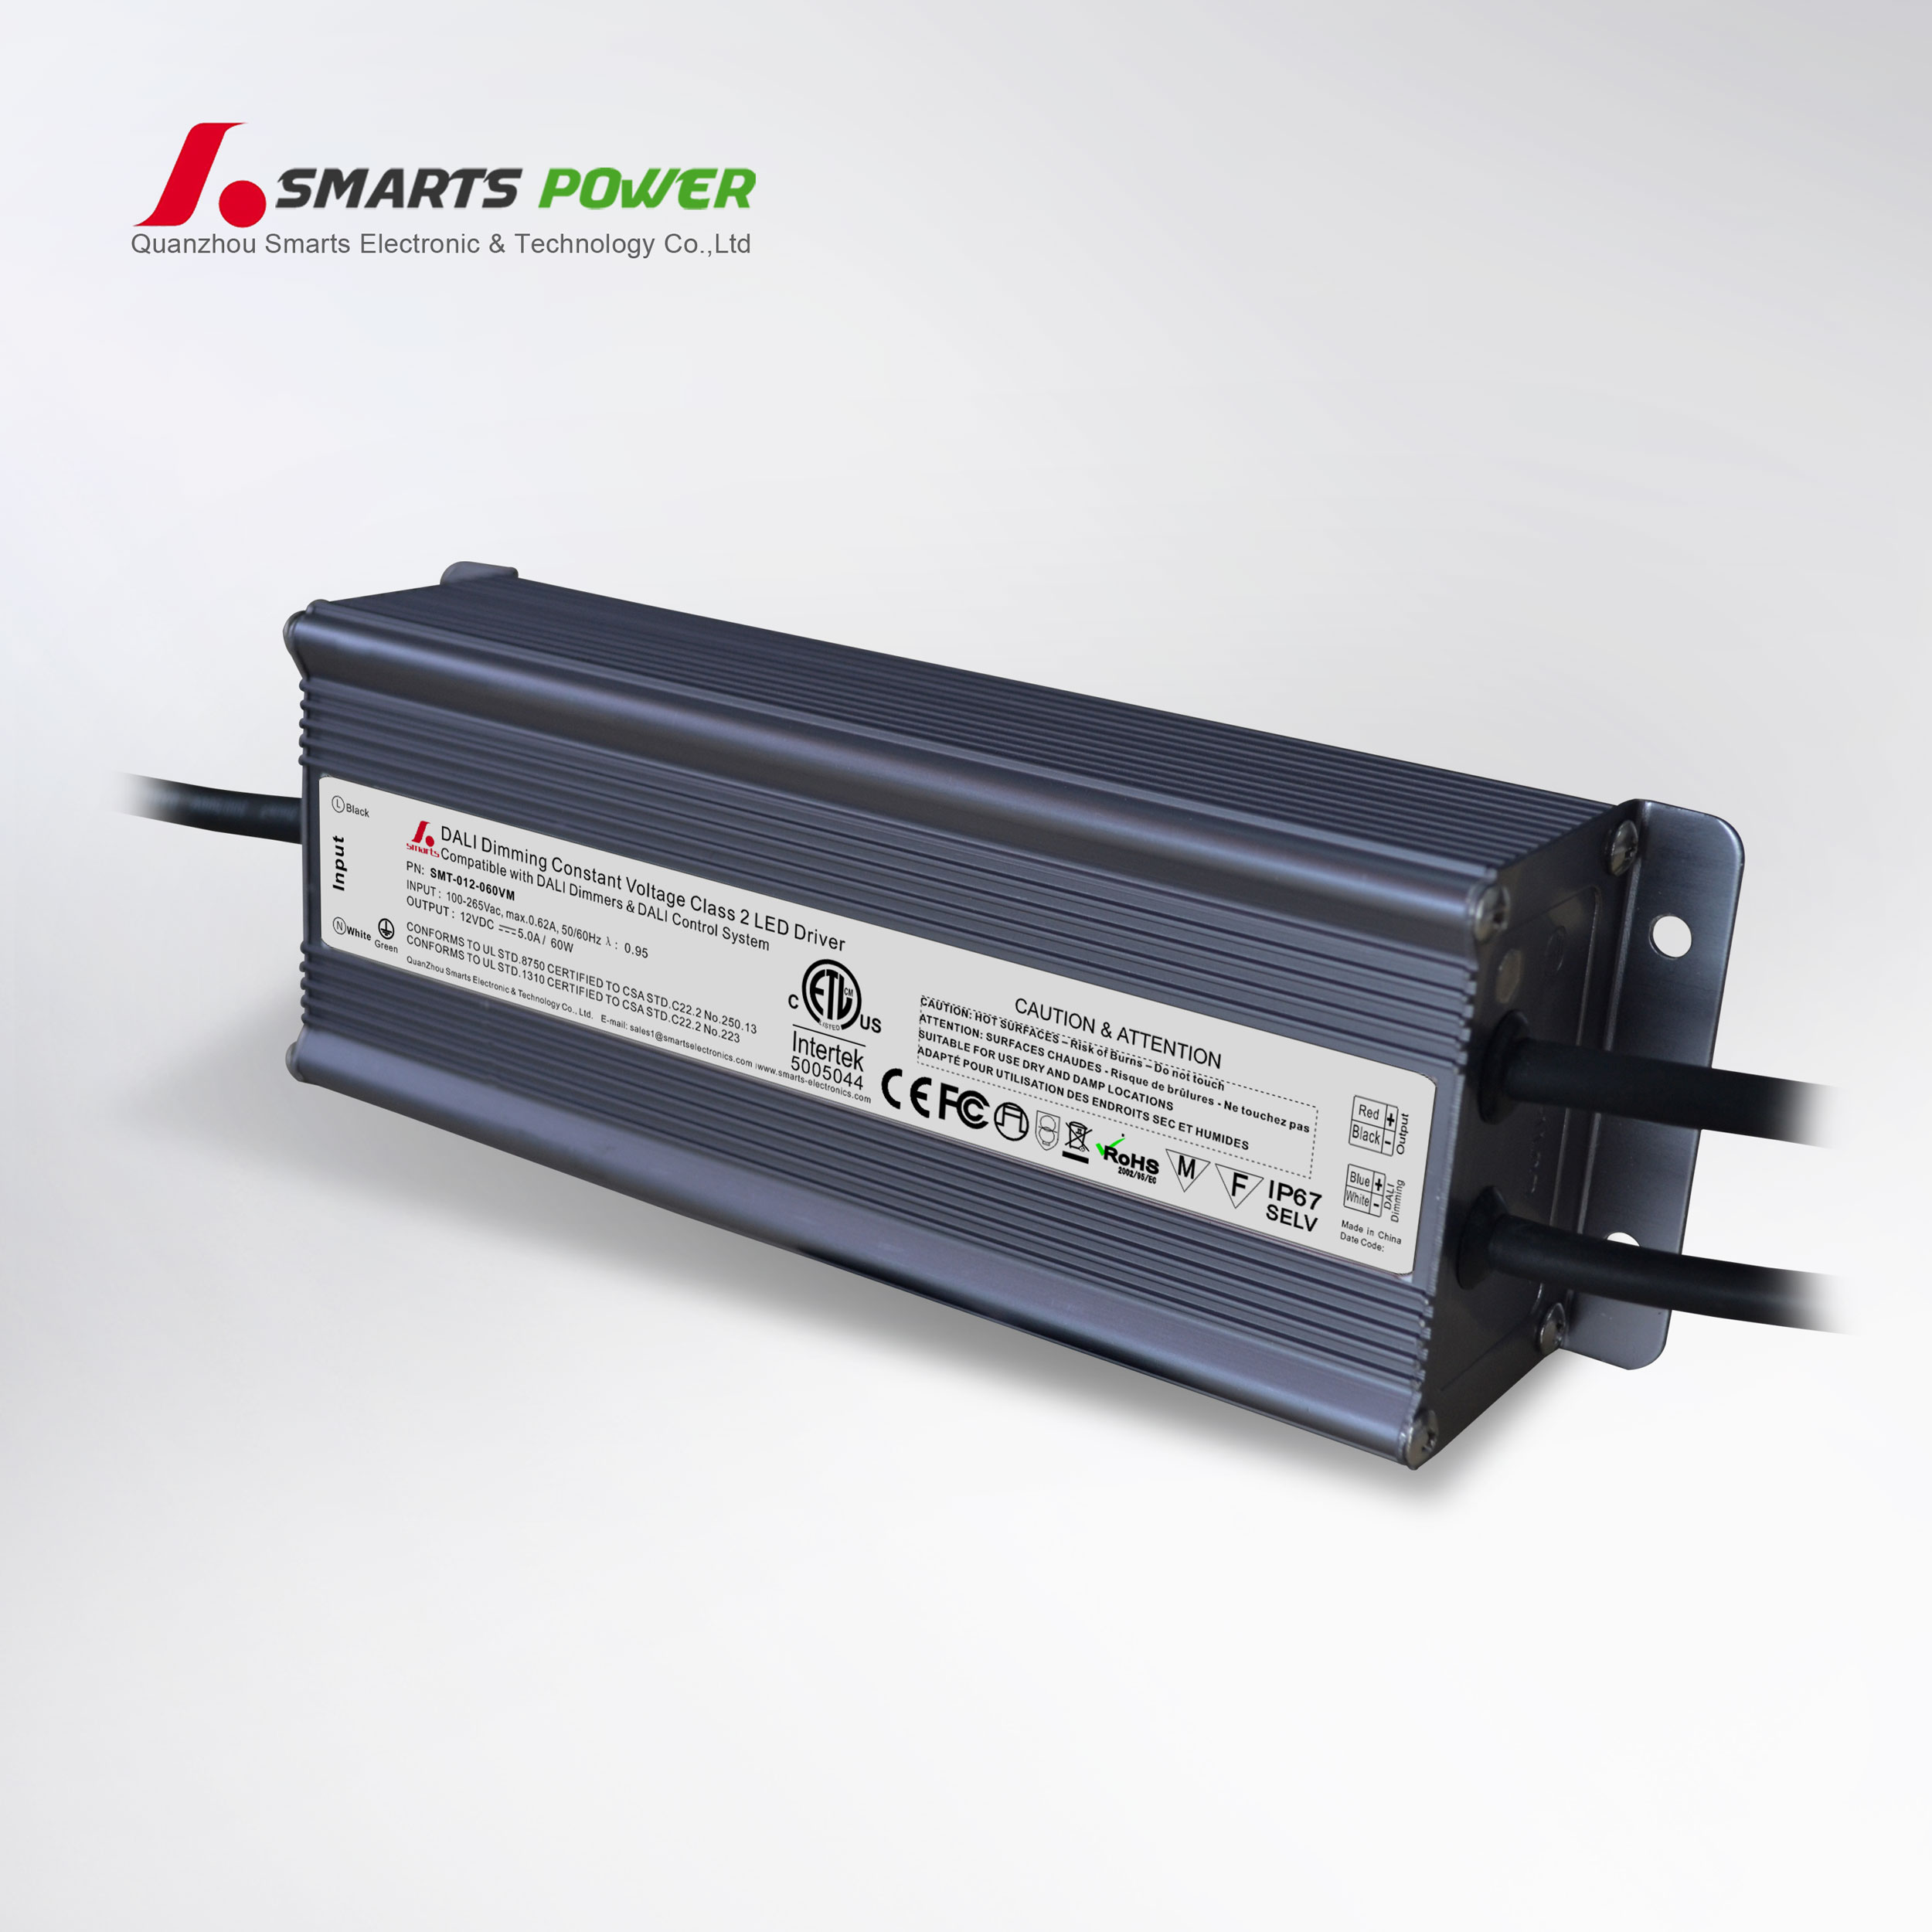 Dali Dimmable LED Driver